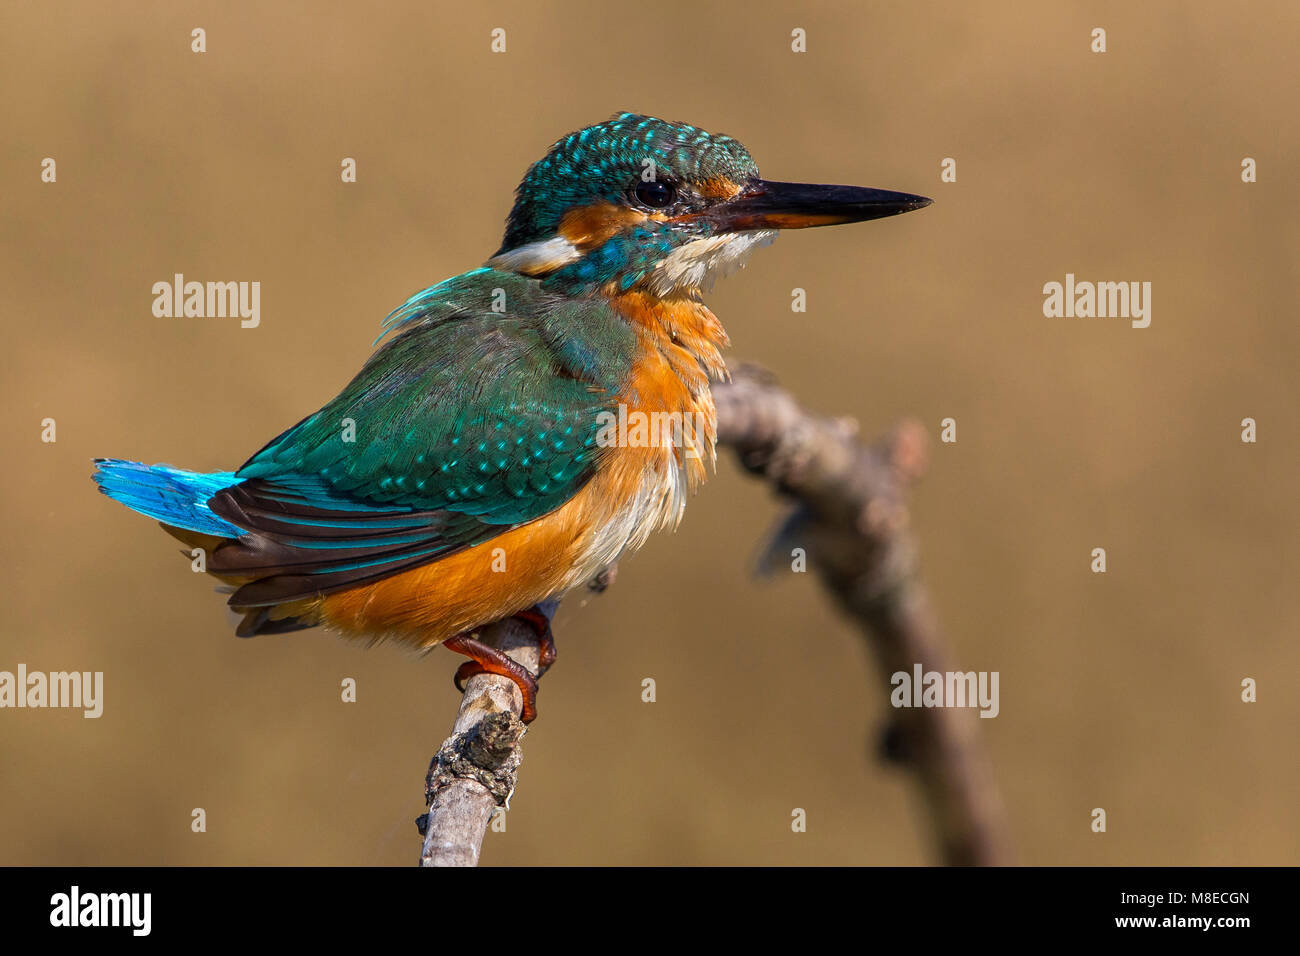 IJsvogel zittend op een tak; Common Kingfisher perched on a branch Stock Photo